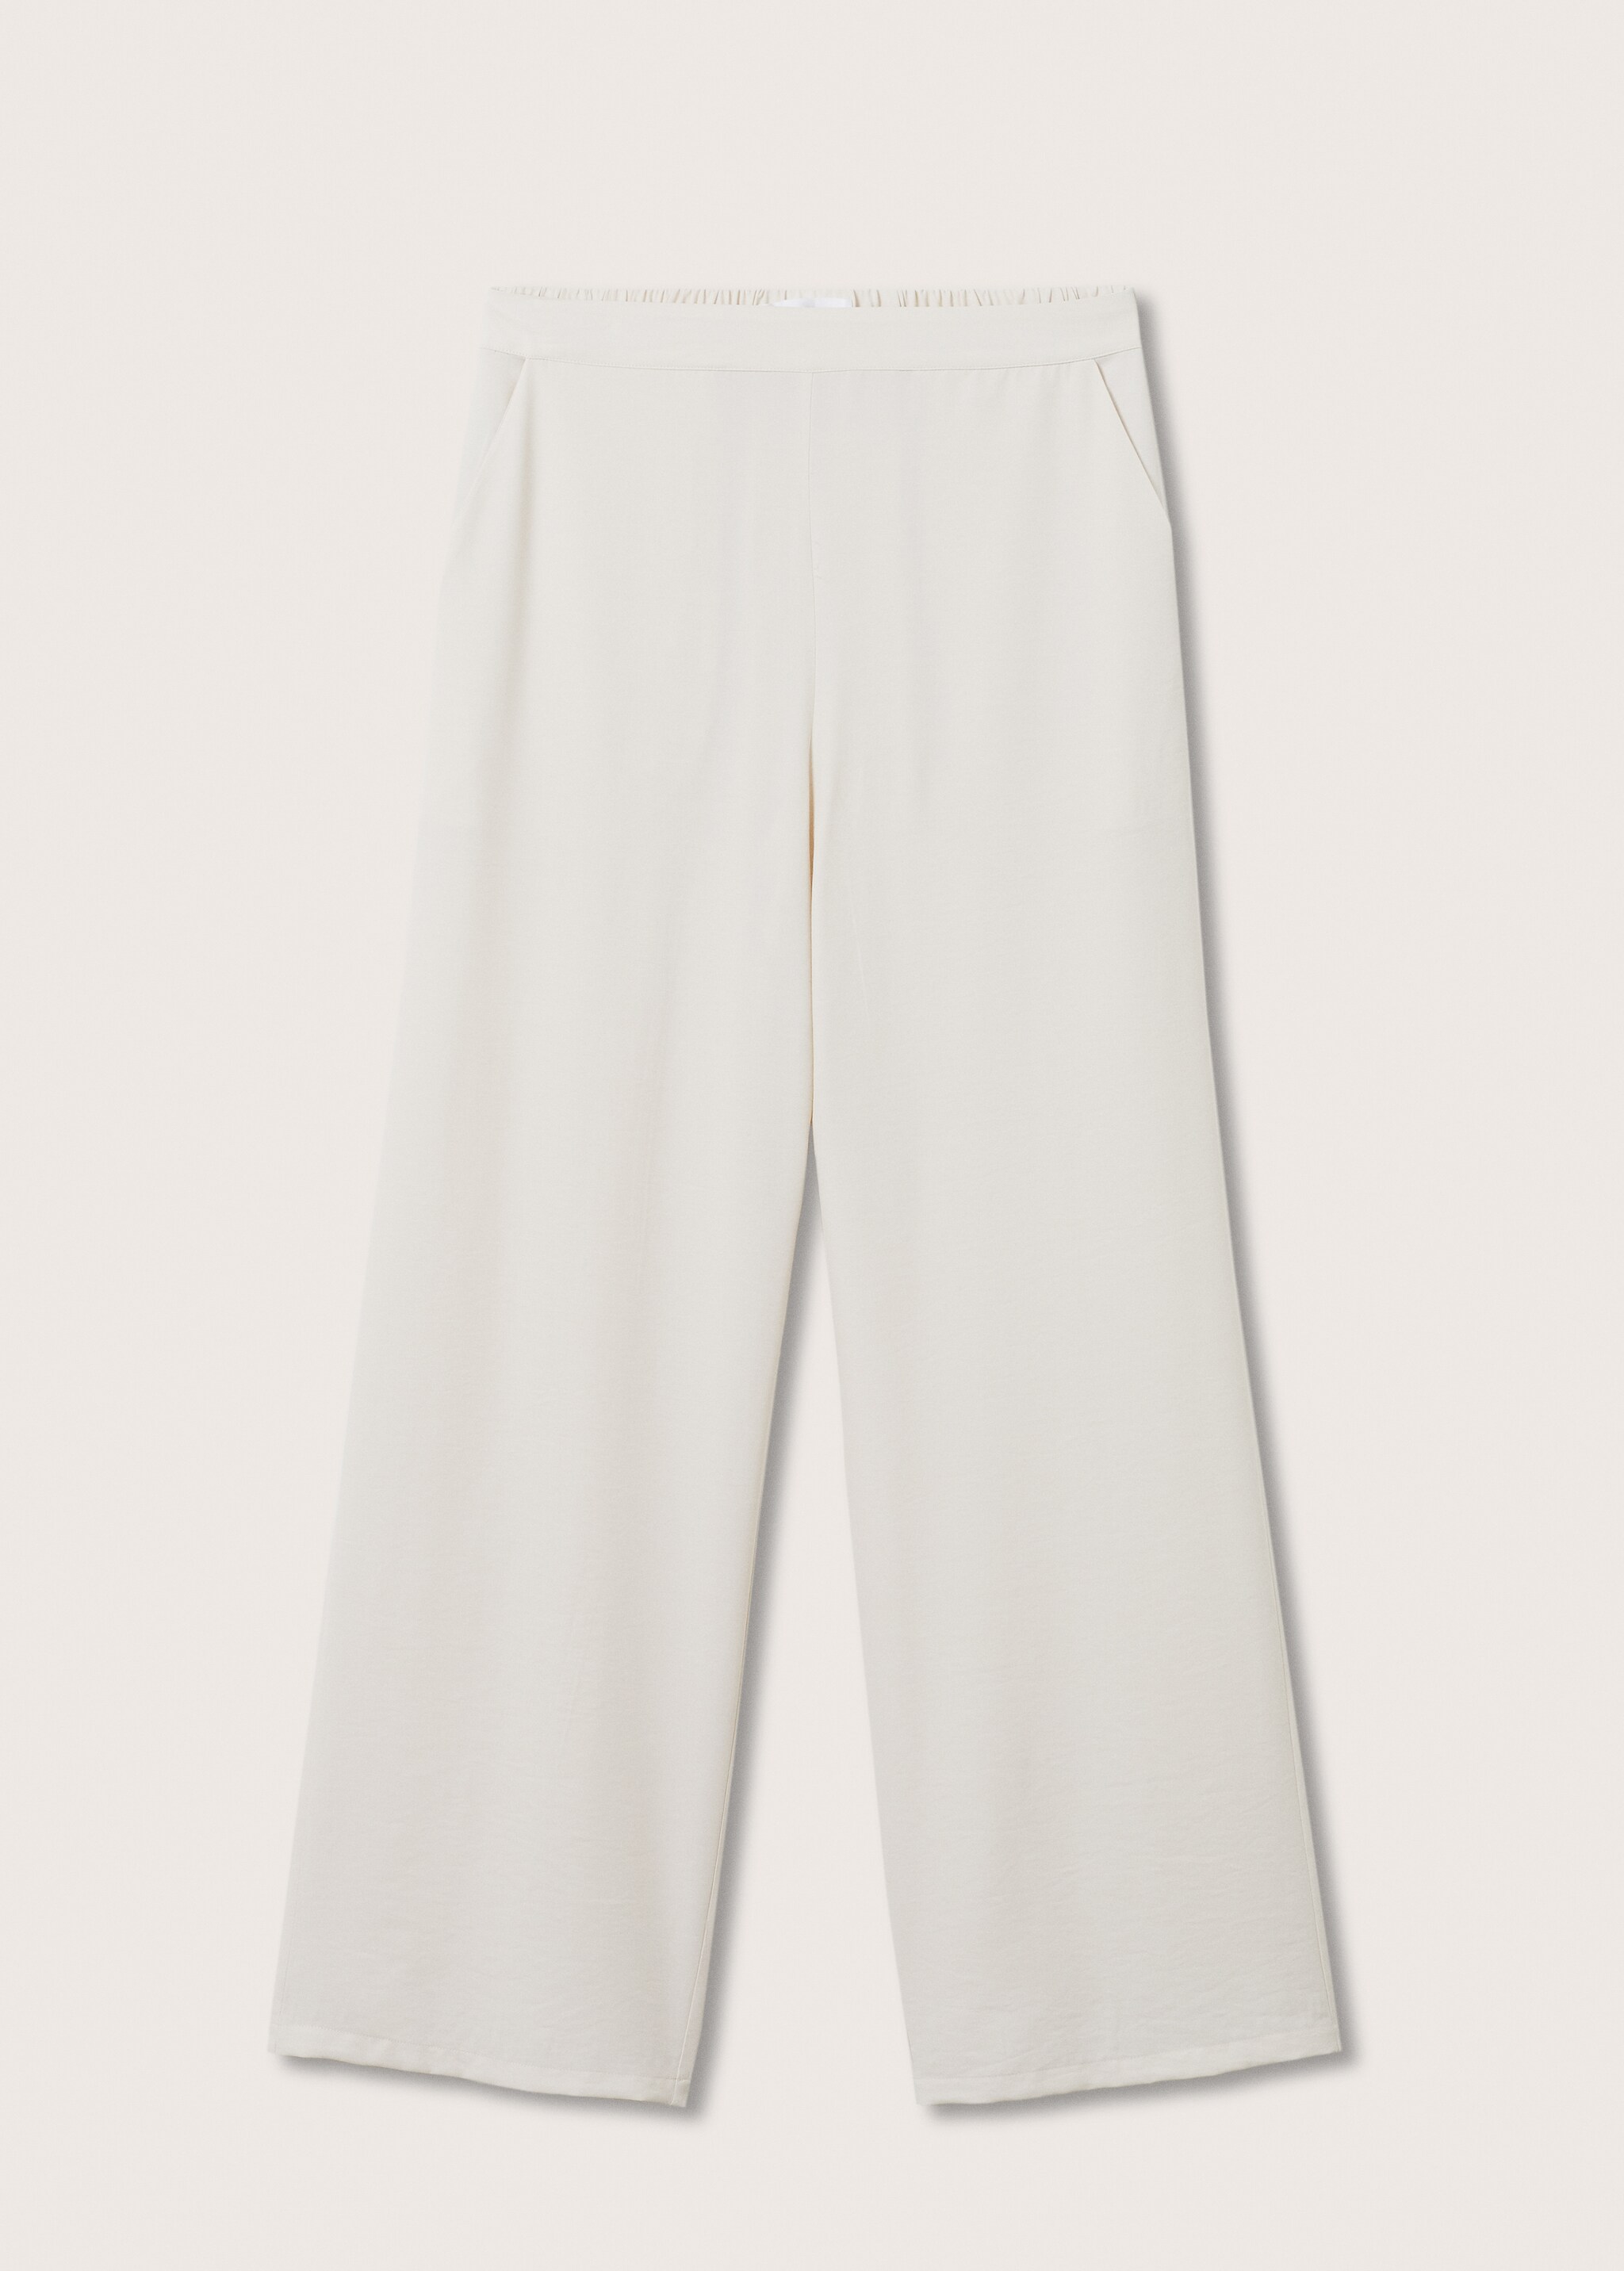 Textured flowy trousers - Article without model